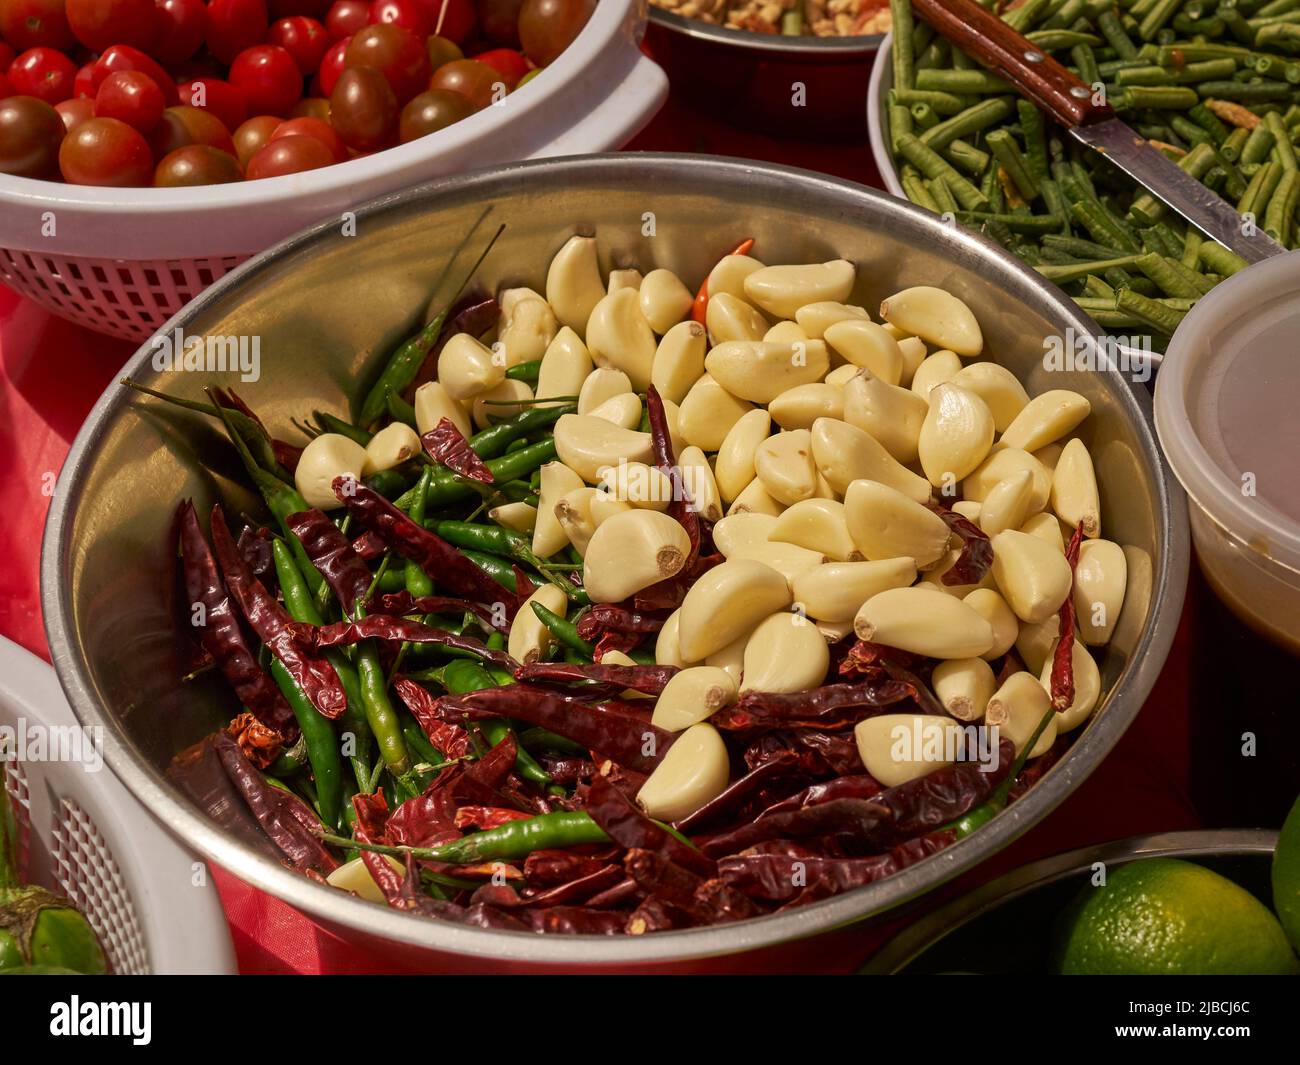 Some of the ingredients for a som tum salad on a street vendor cart, Little Thailand, Queens, New York City, USA Stock Photo